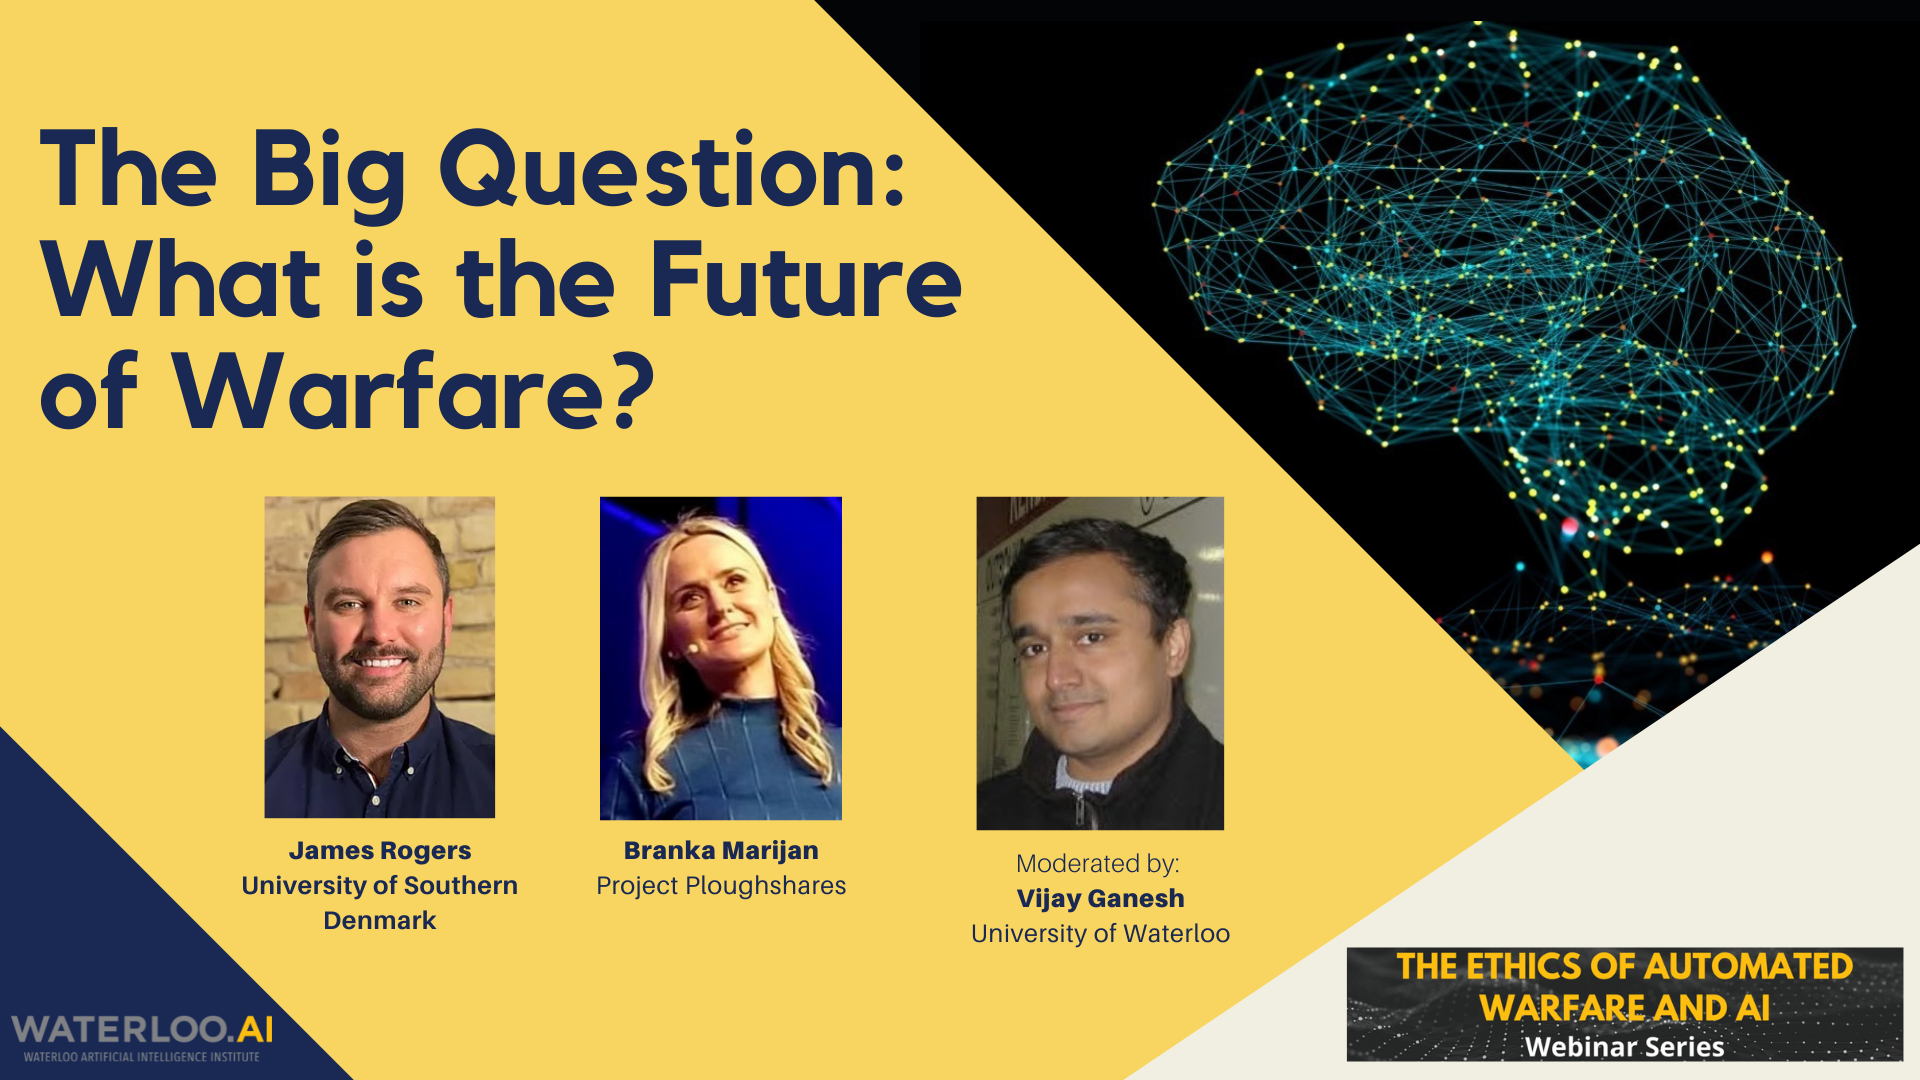 The big question: What is the future of warfare? Event poster with speakers James Rogers, Branka Marijan and Vijay Ganesh.